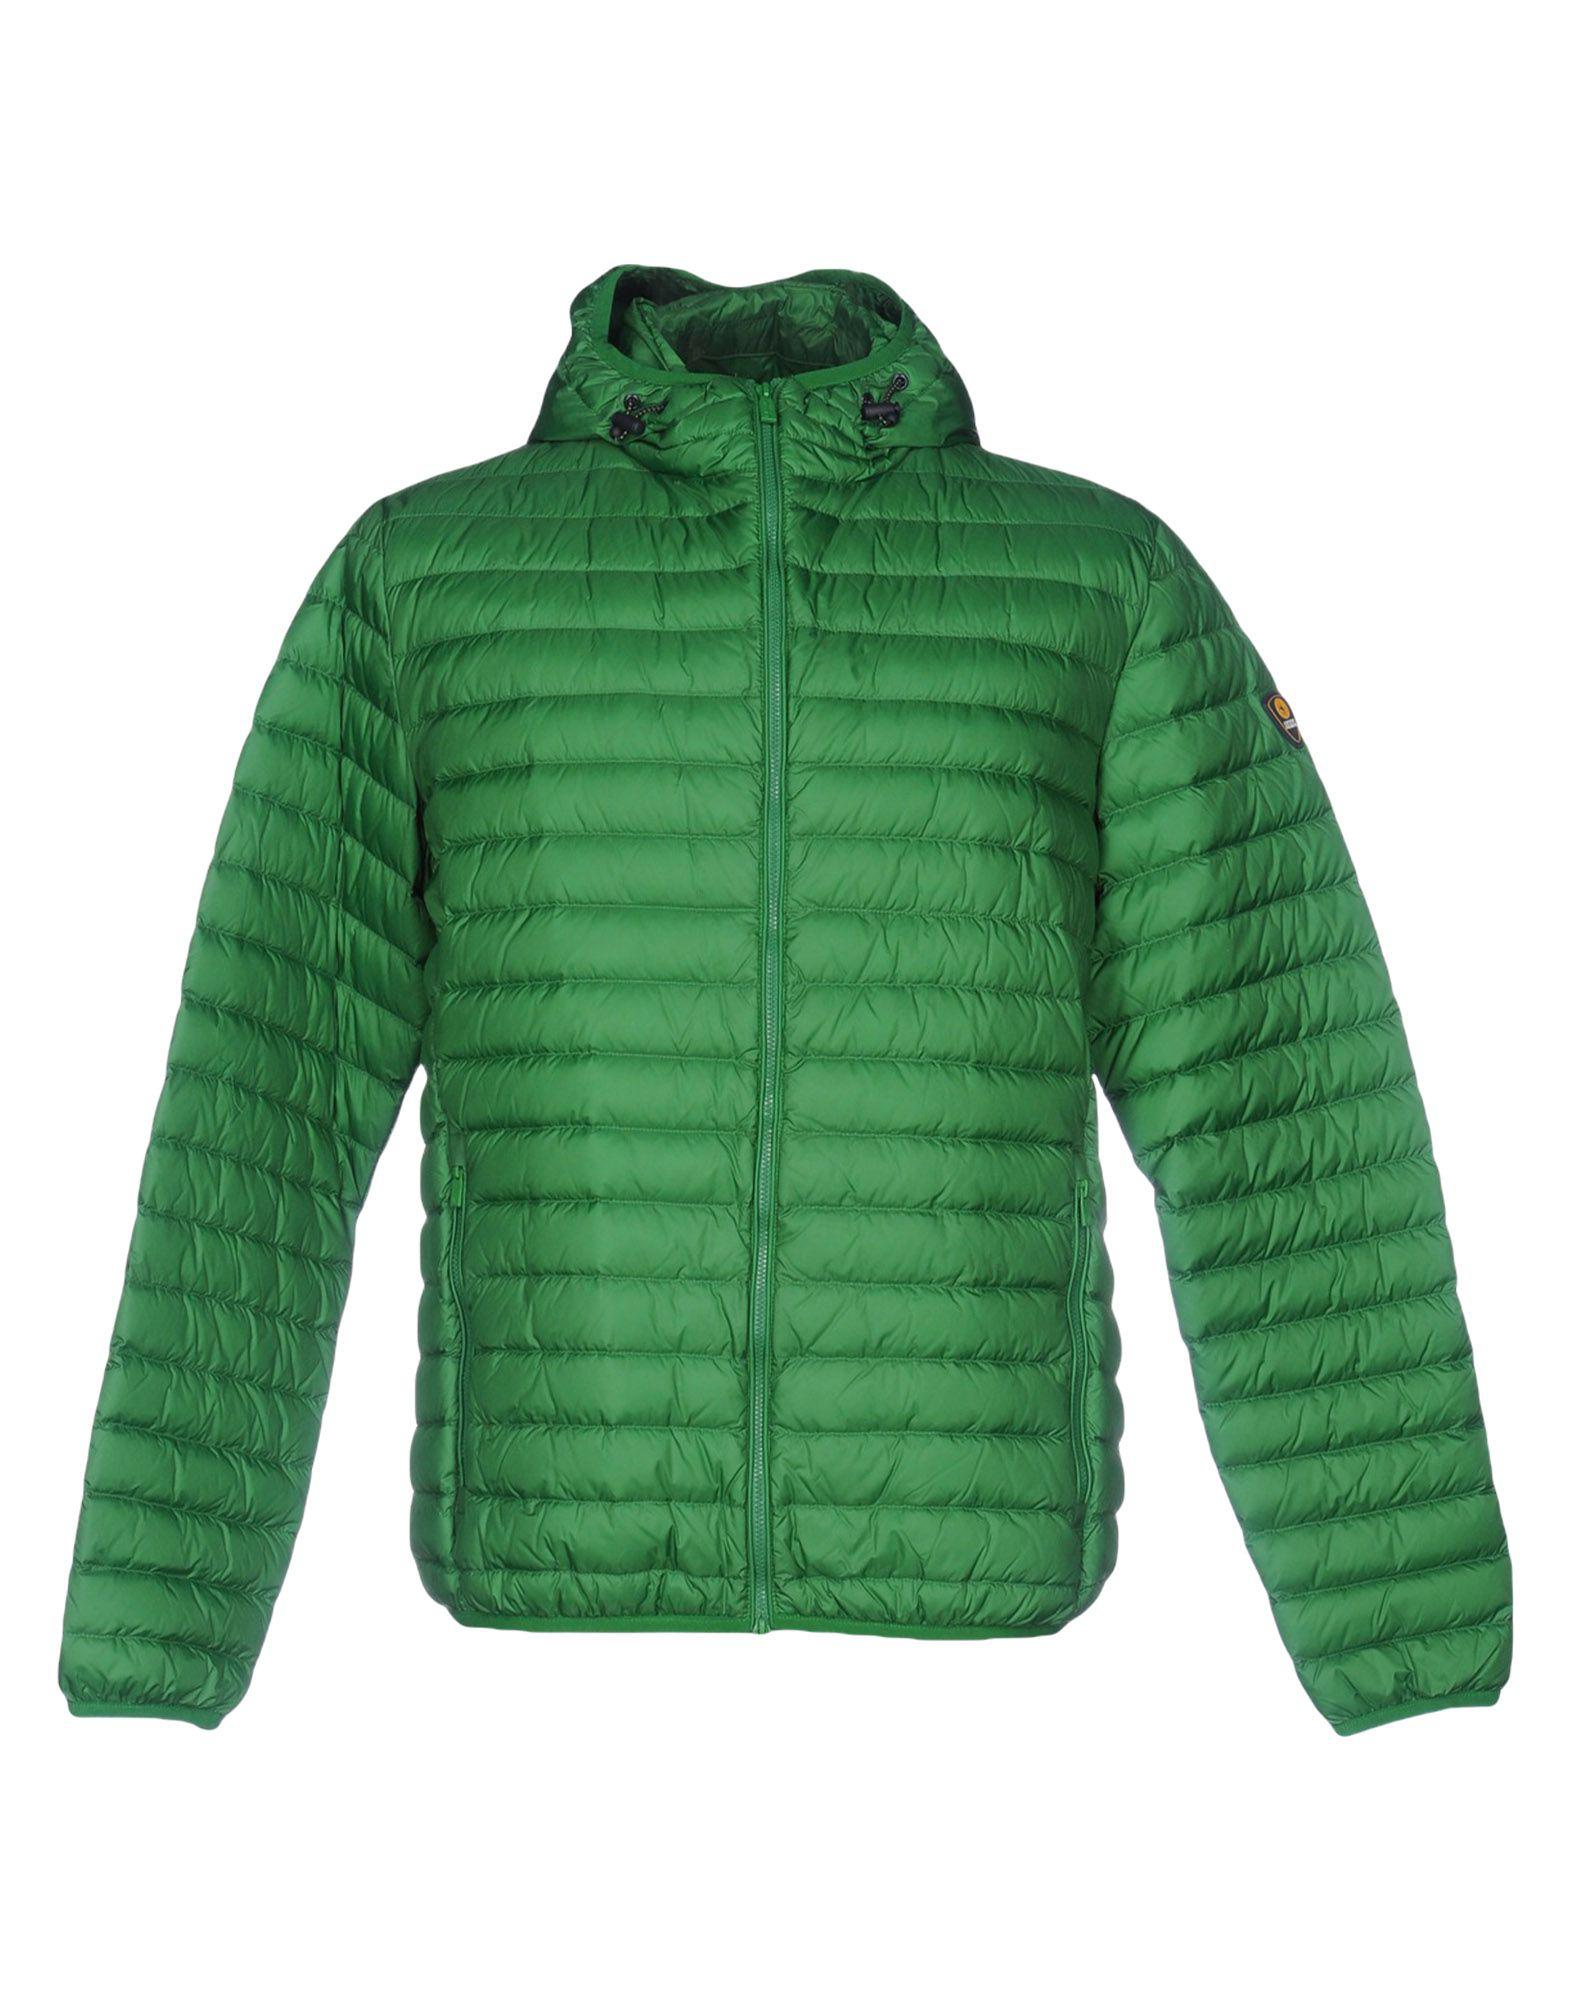 Lyst - Ciesse Piumini Down Jacket in Green for Men - Save 20.0%